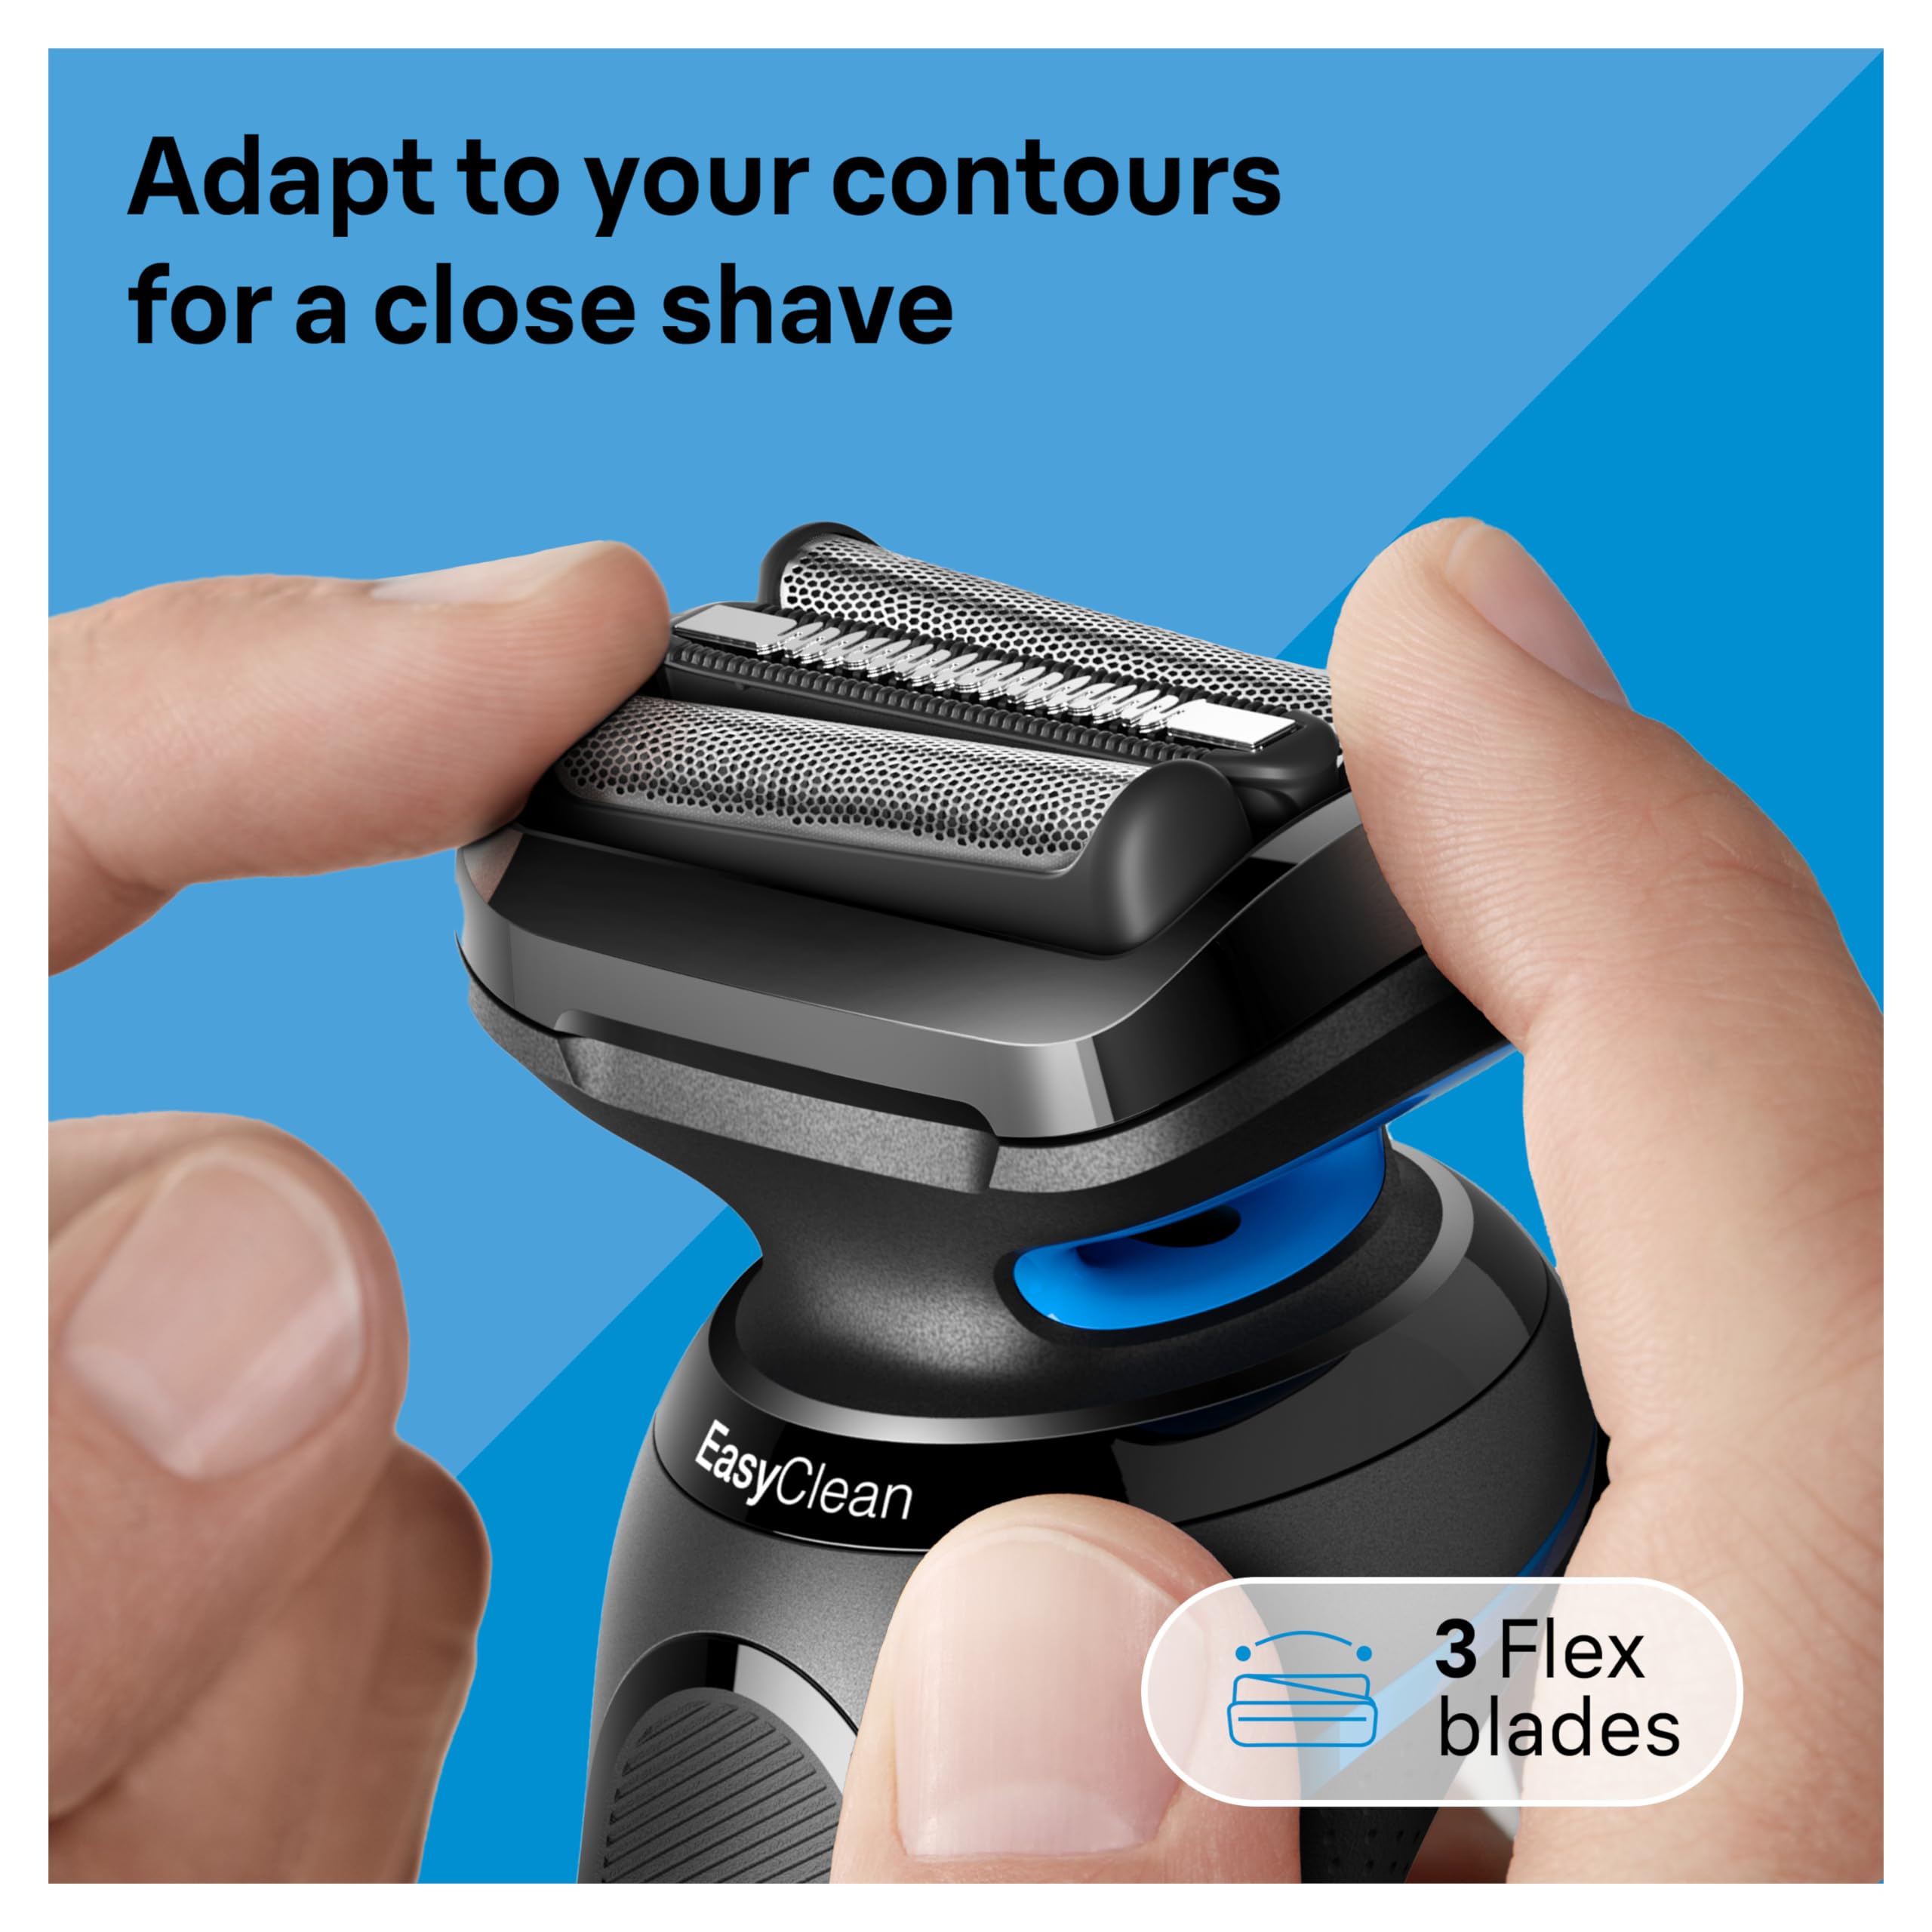 Braun Electric Shaver for Men, Series 5 5118s, Wet & Dry Shave, Turbo Shaving Mode, Foil Shaver, Engineered in Germany, with Precision Trimmer, Blue